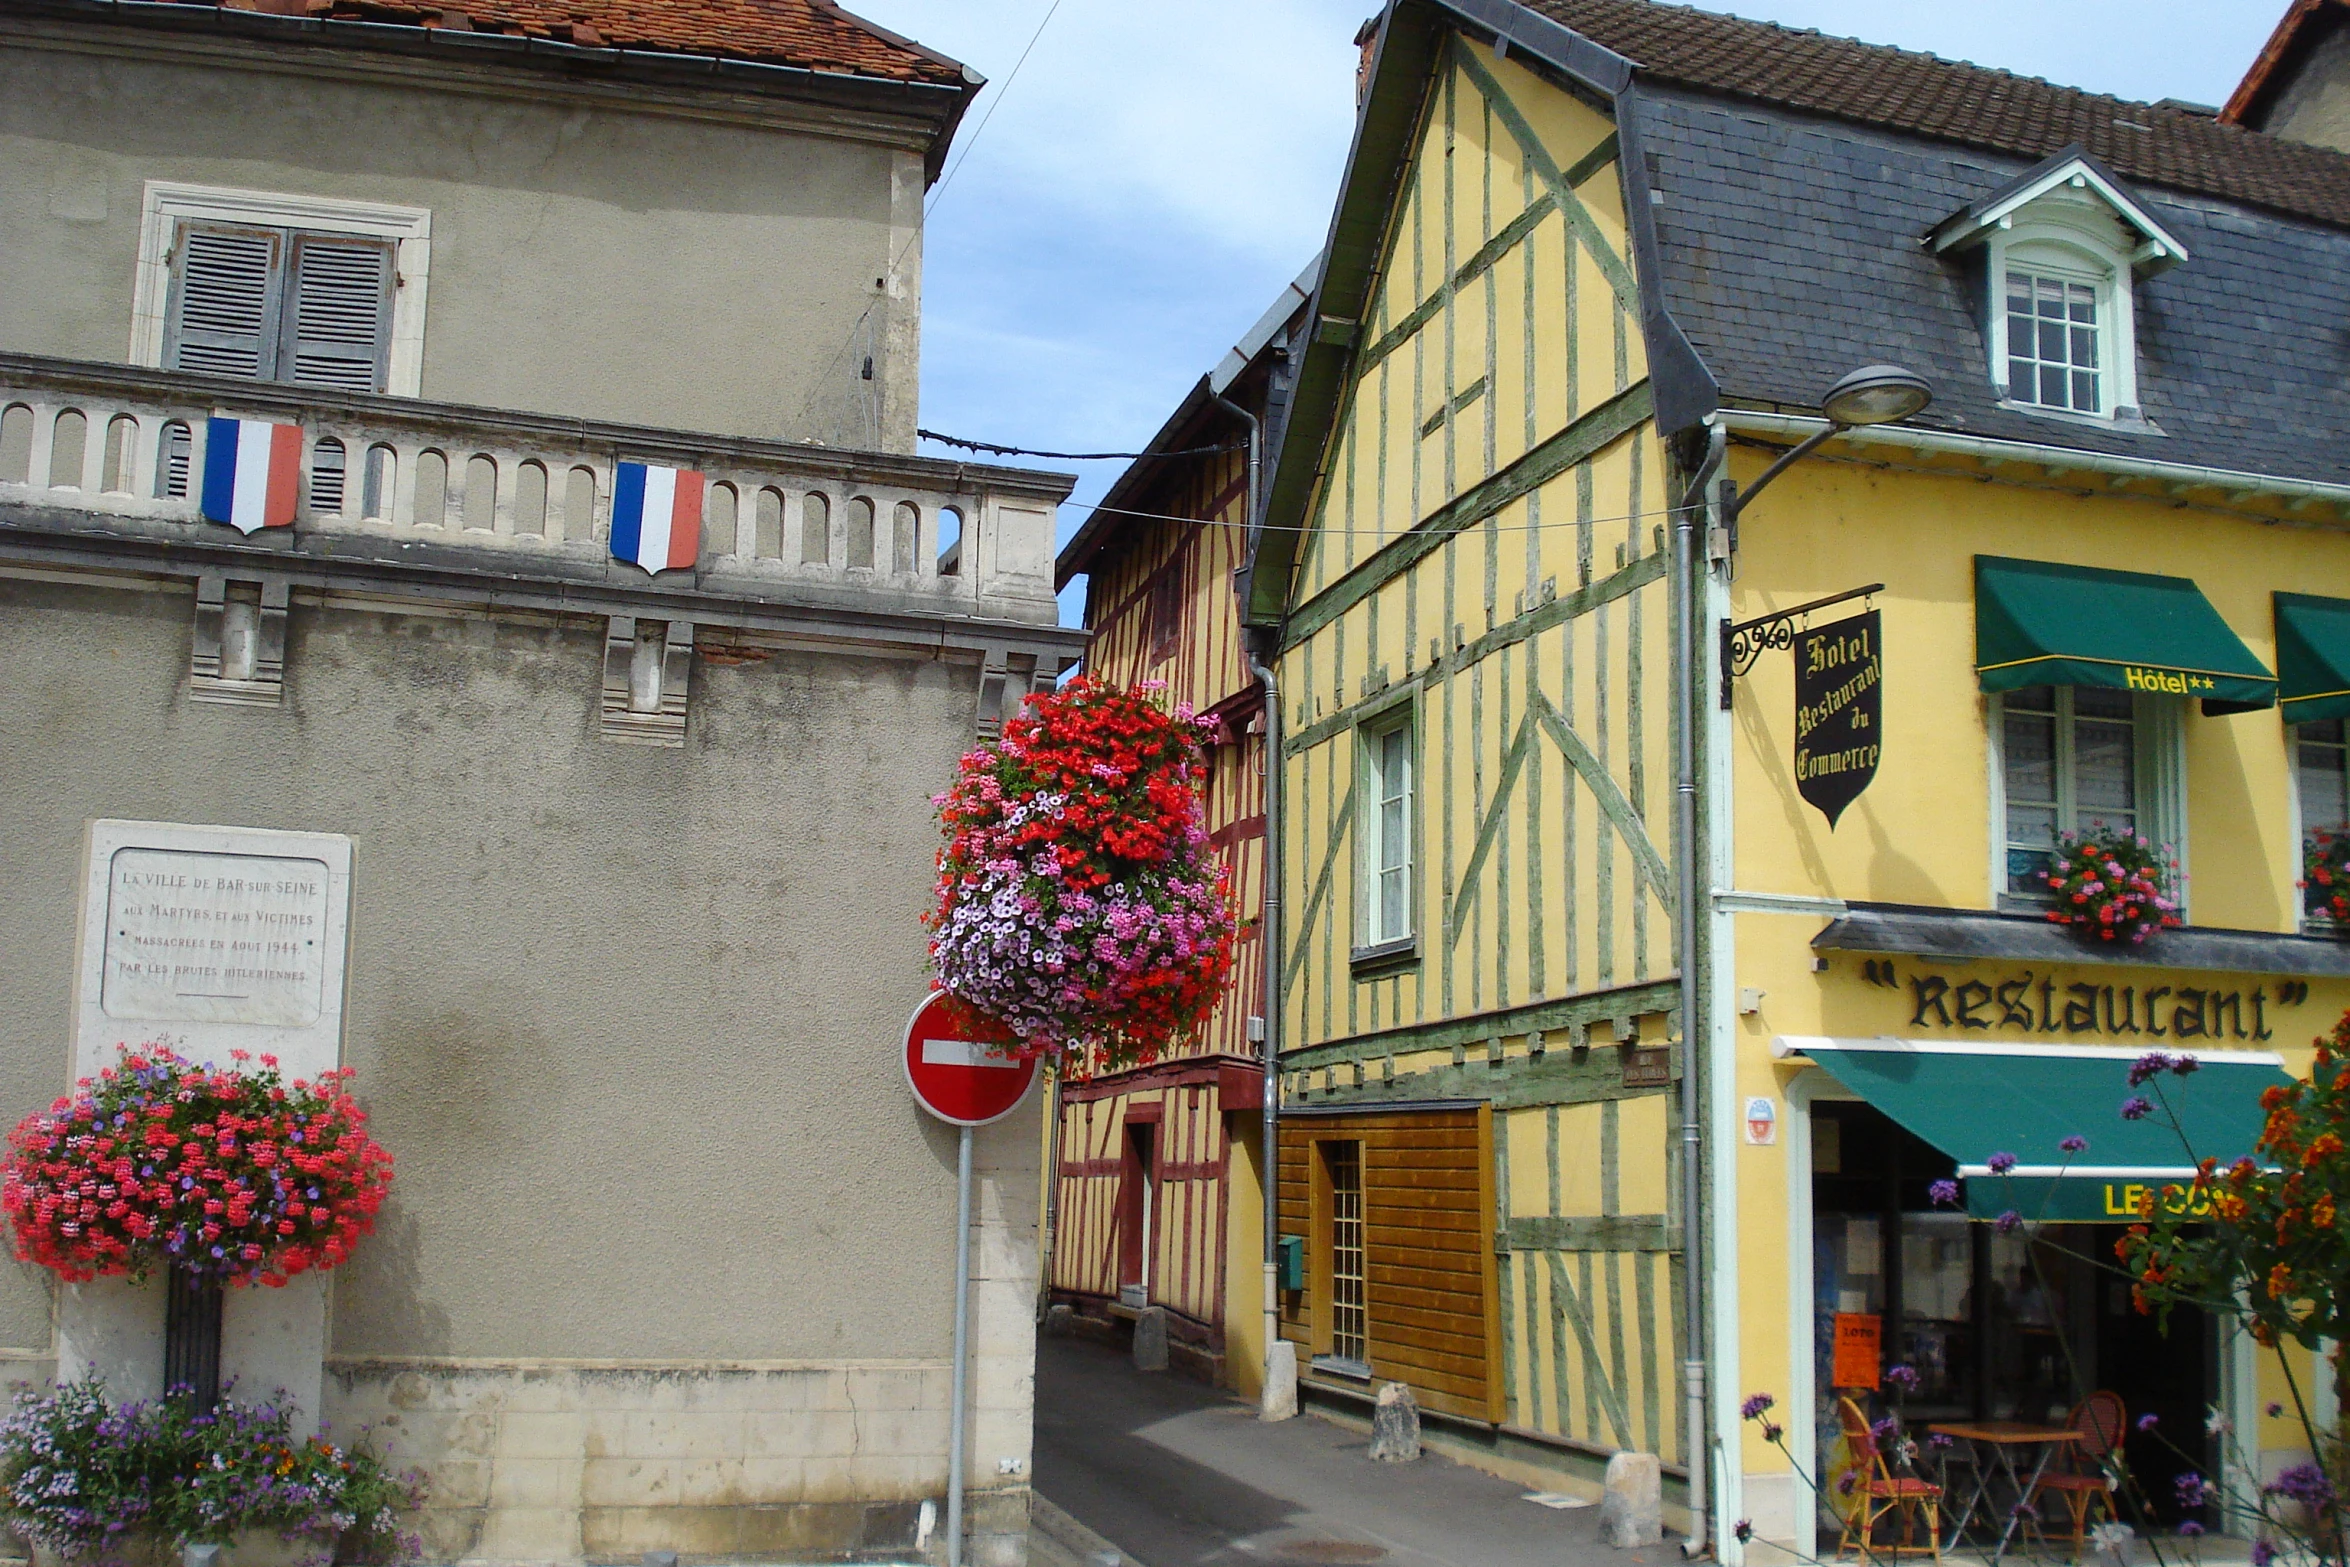 buildings lining a street with store fronts and hanging flower baskets